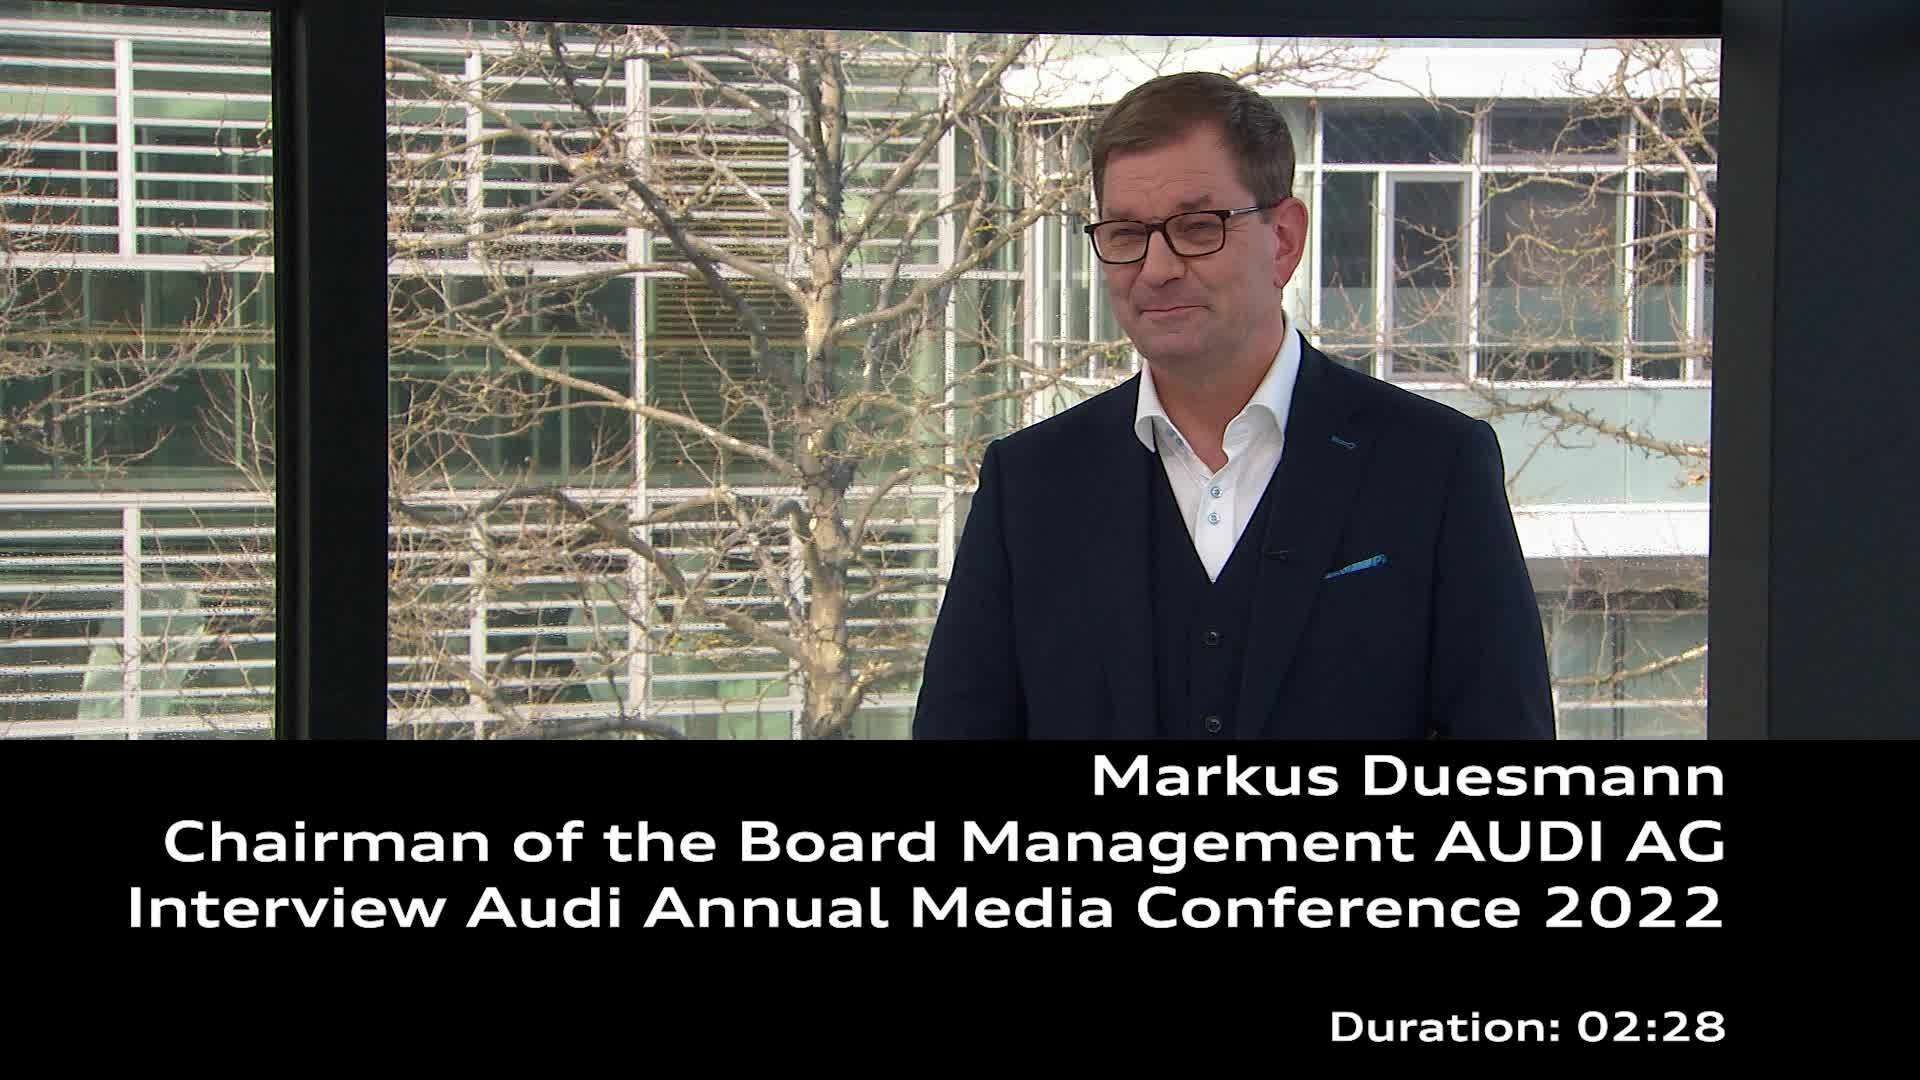 Interview with Markus Duesmann at the Audi Annual Media Conference 2022